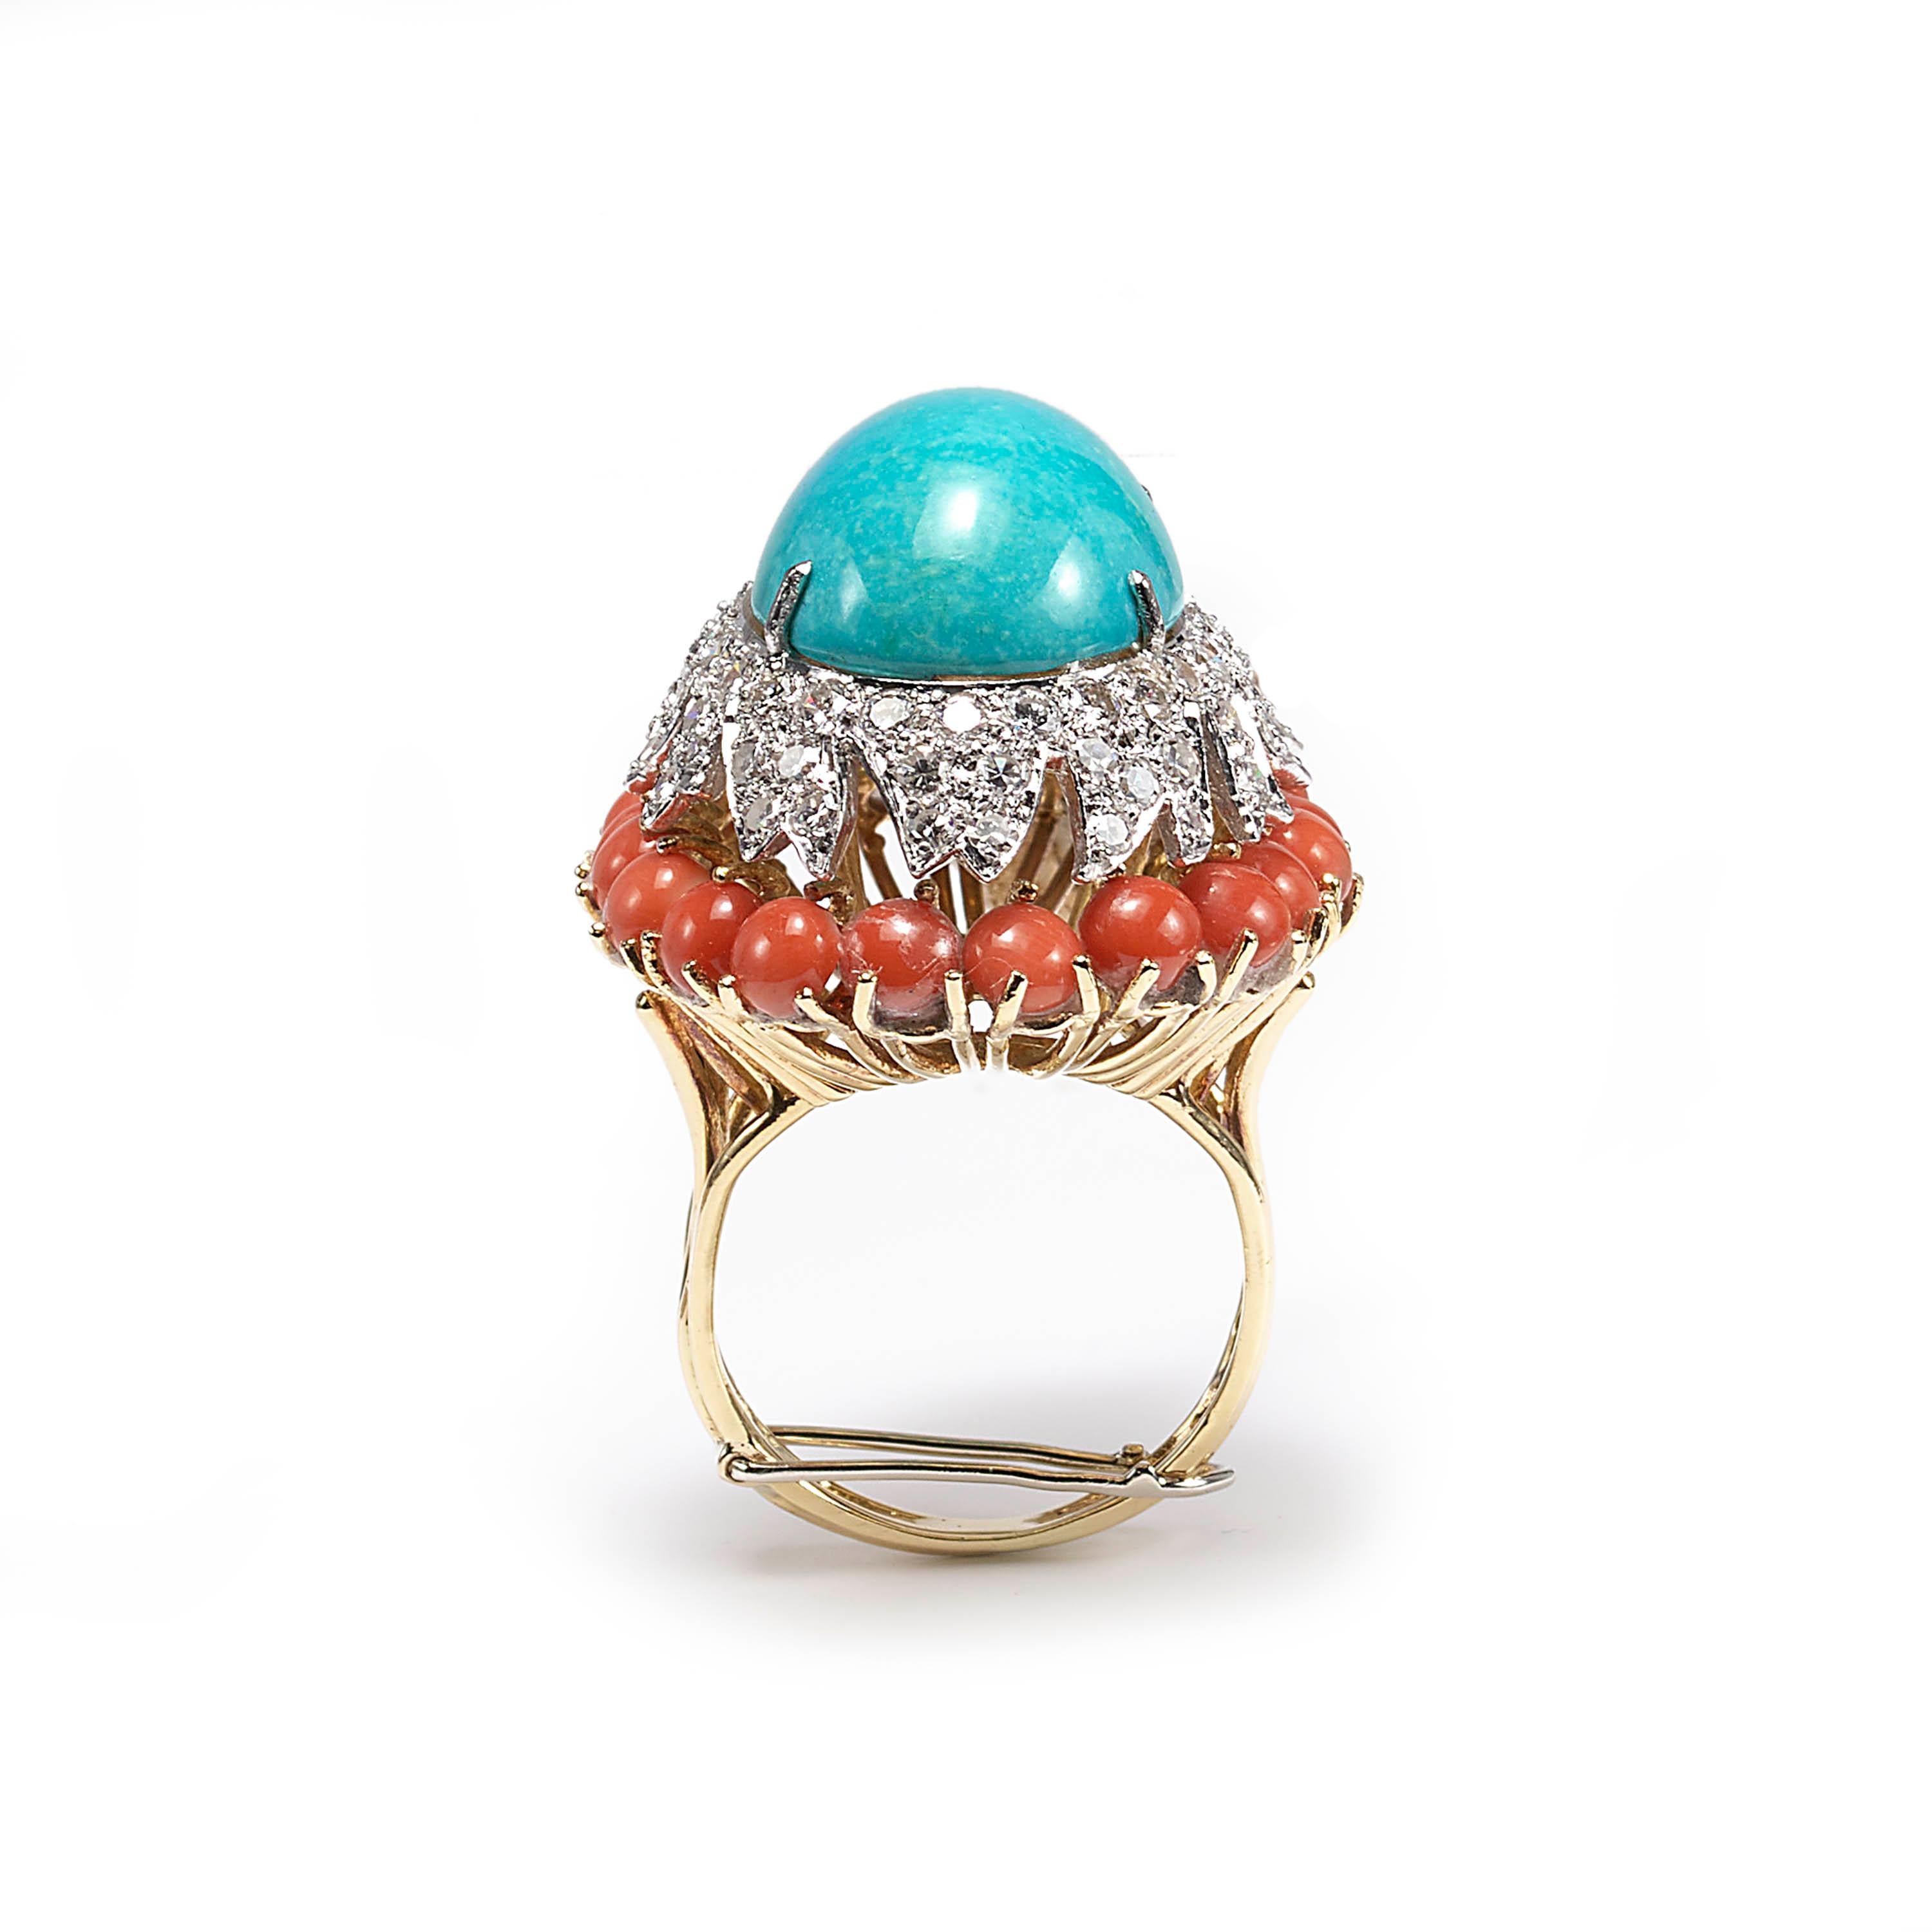 A Van Cleef & Arpels turquoise, coral and diamond cocktail ring, cabochon cut turquoise, surrounded by pave set, single-cut and brilliant-cut diamonds, weighing an estimated total of 2.10ct, with a further surround of round cabochon cut corals, with